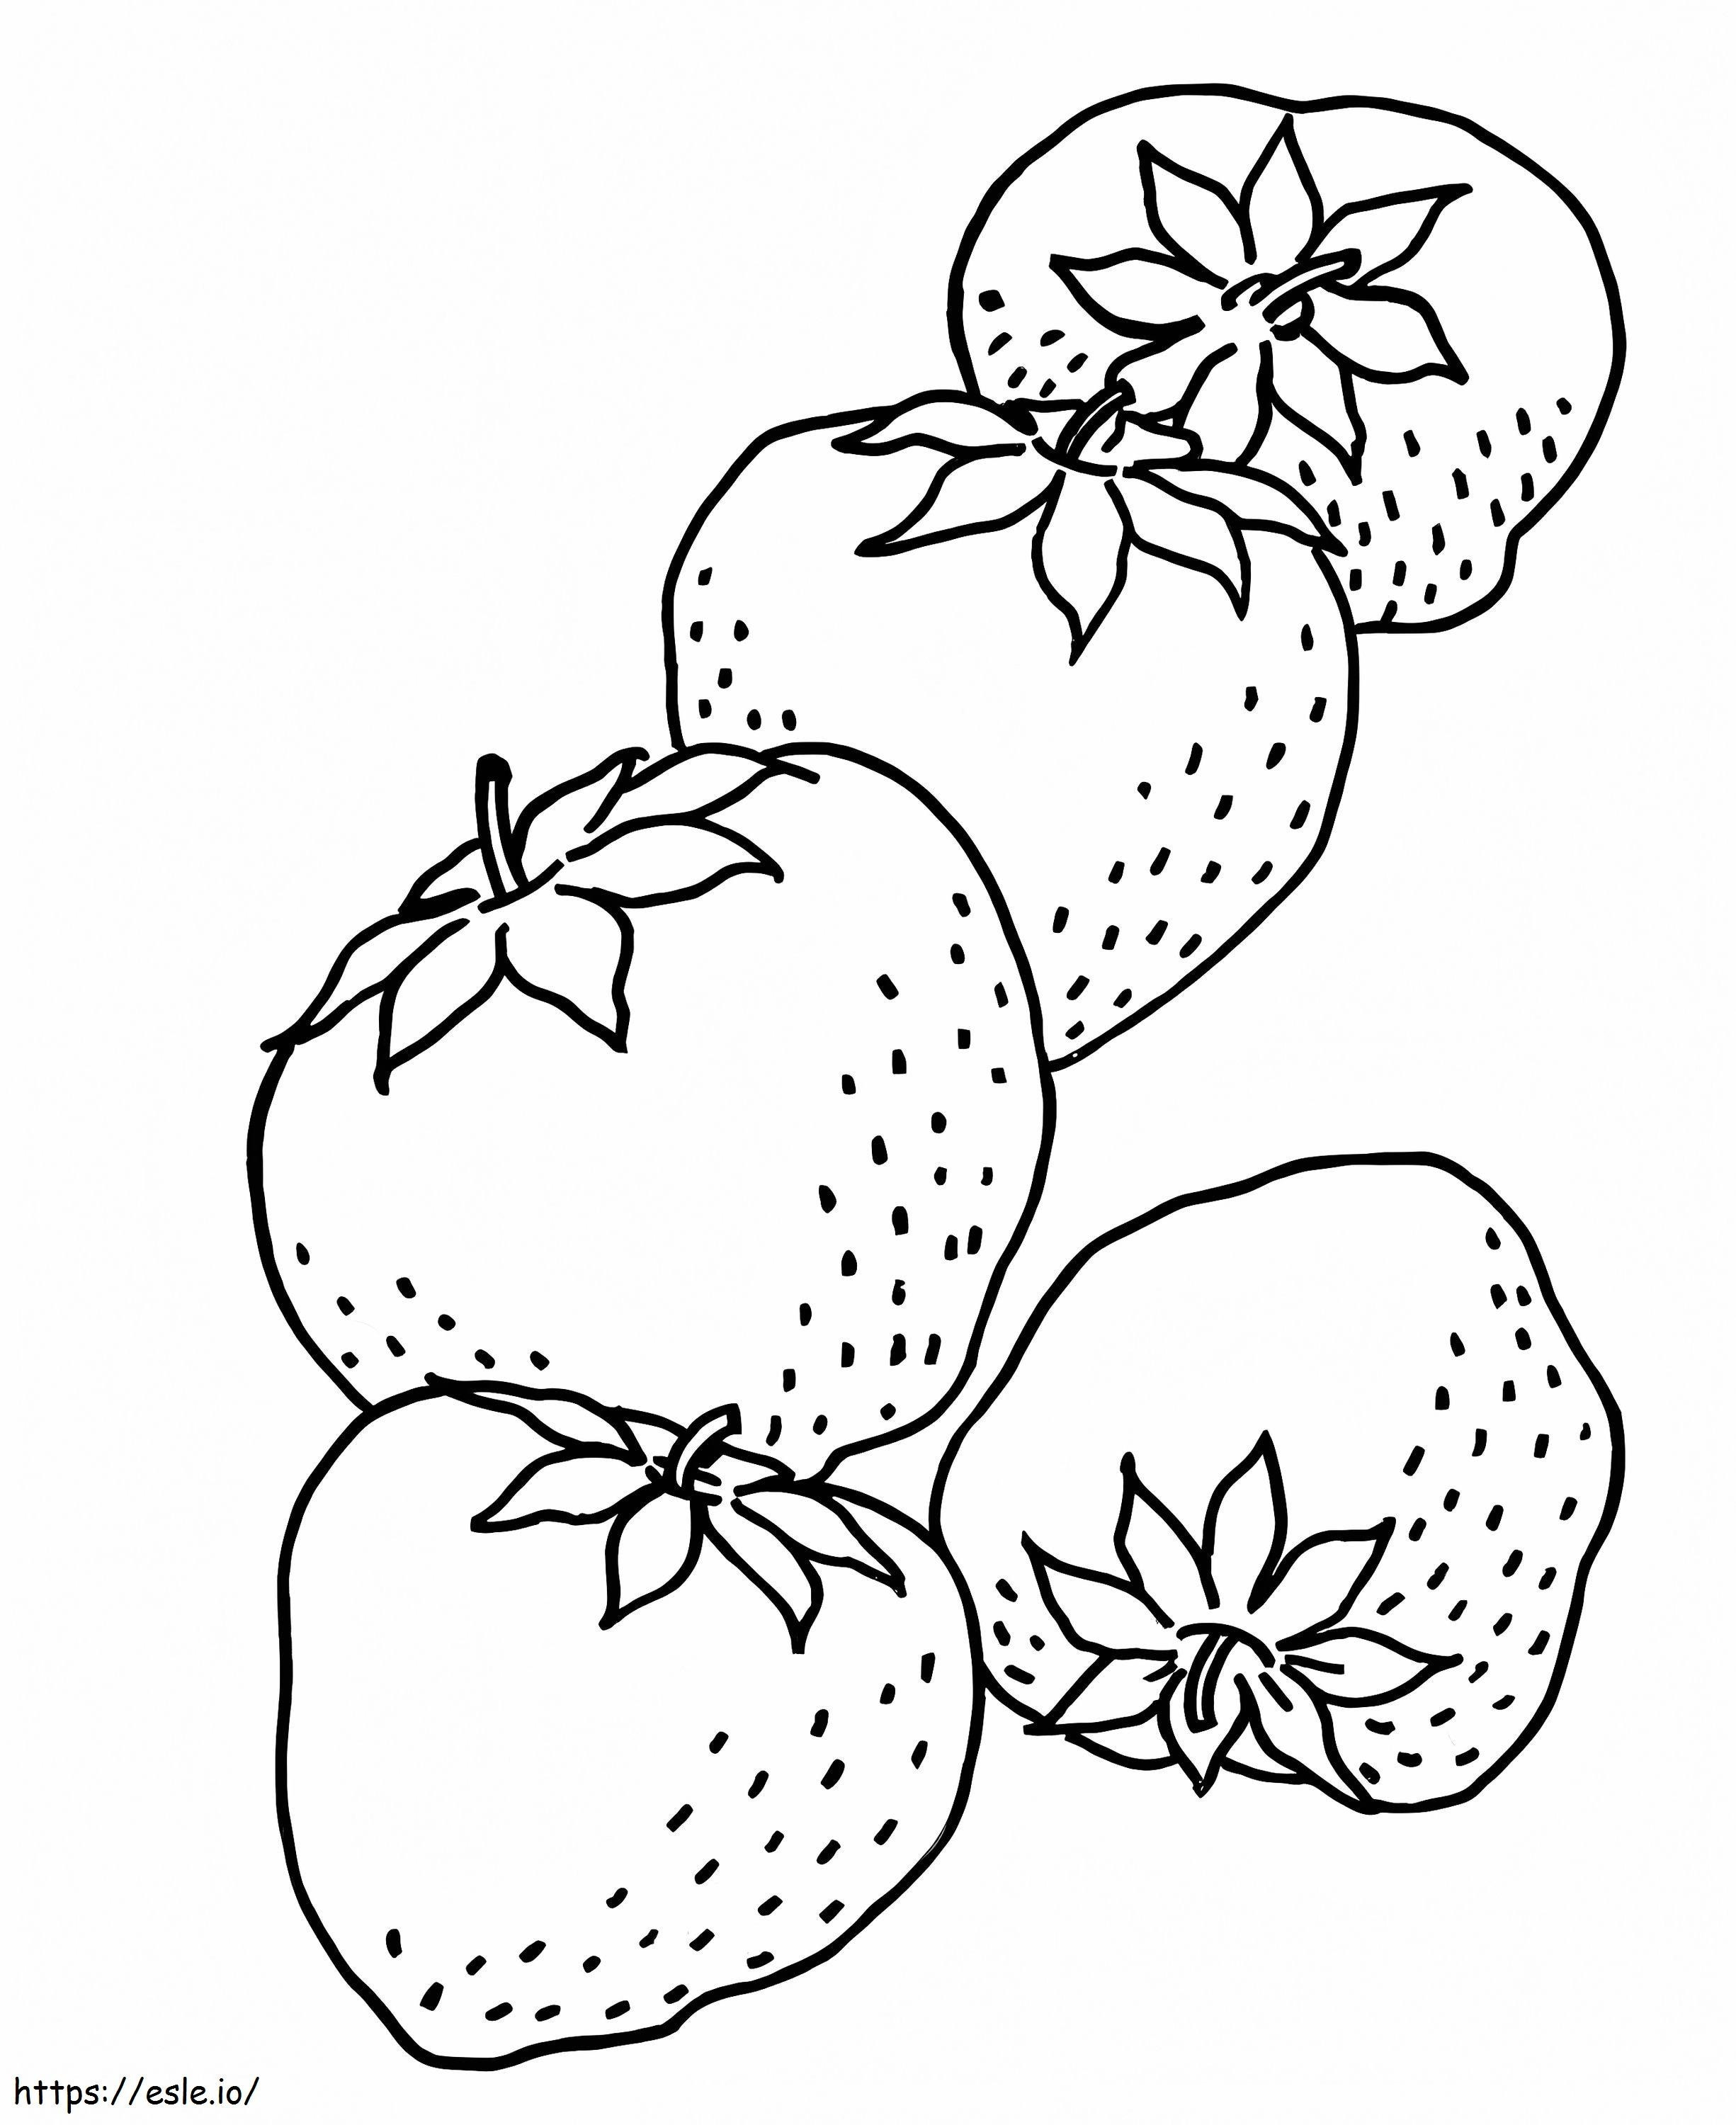 Five Basic Strawberry coloring page